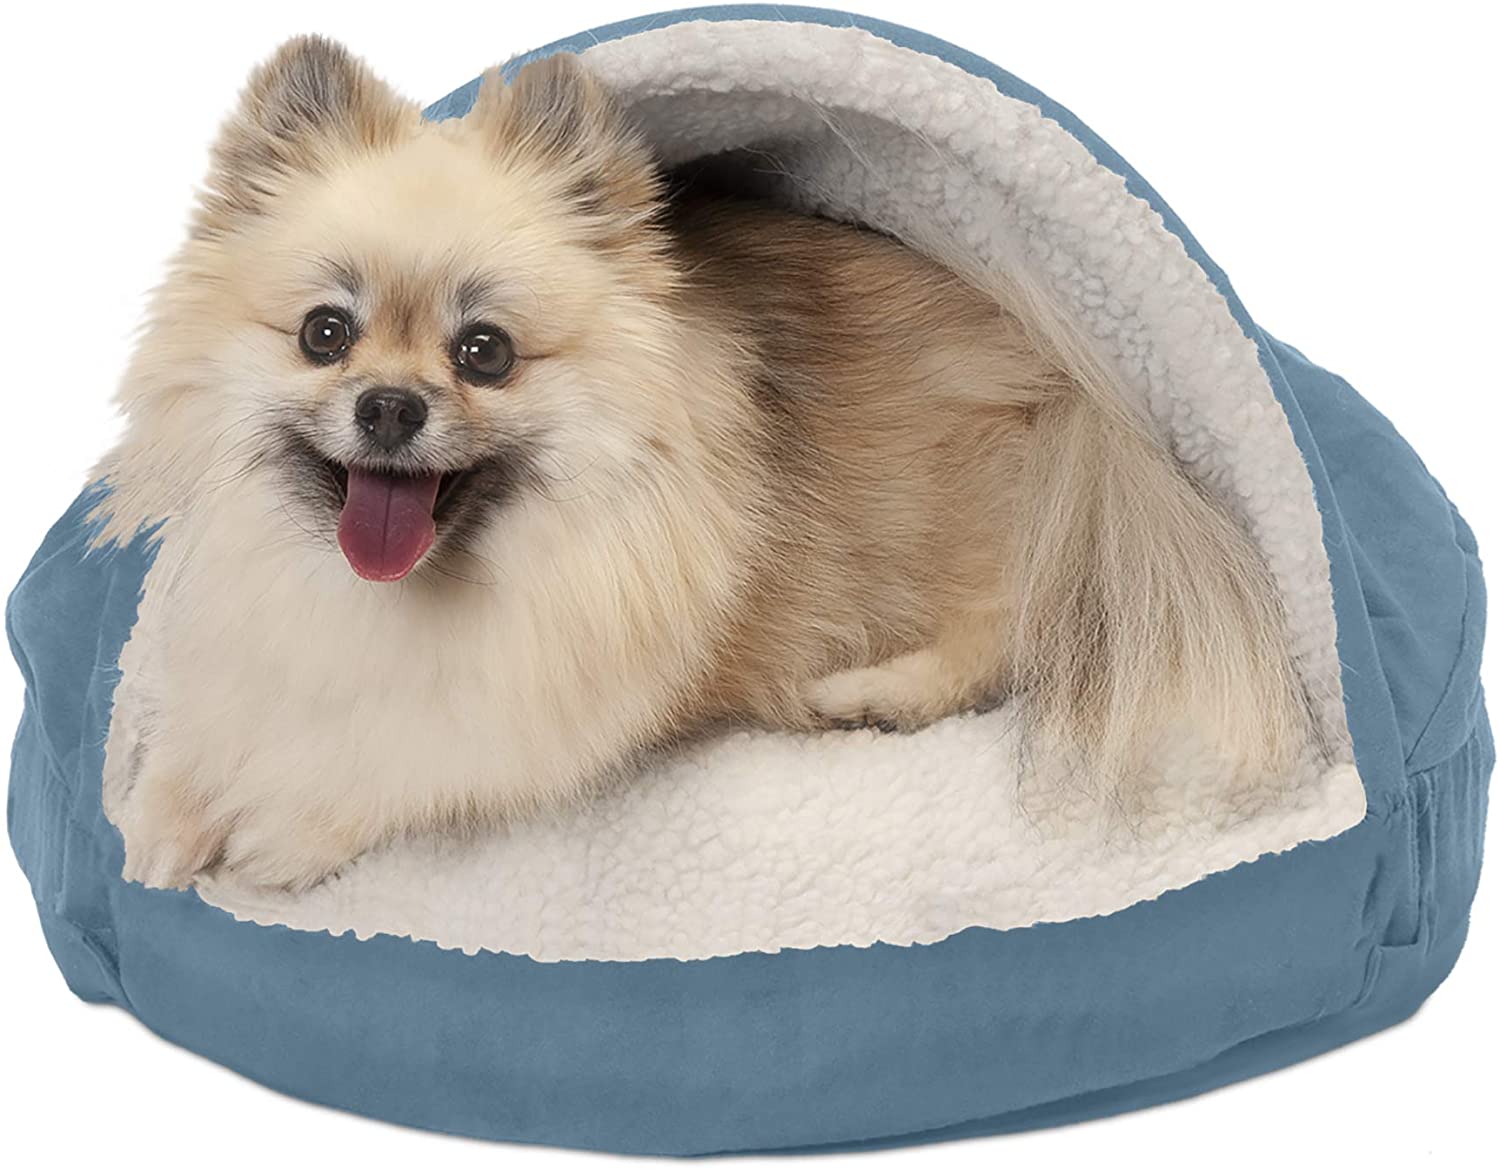 Furhaven Snuggery Burrow Bed